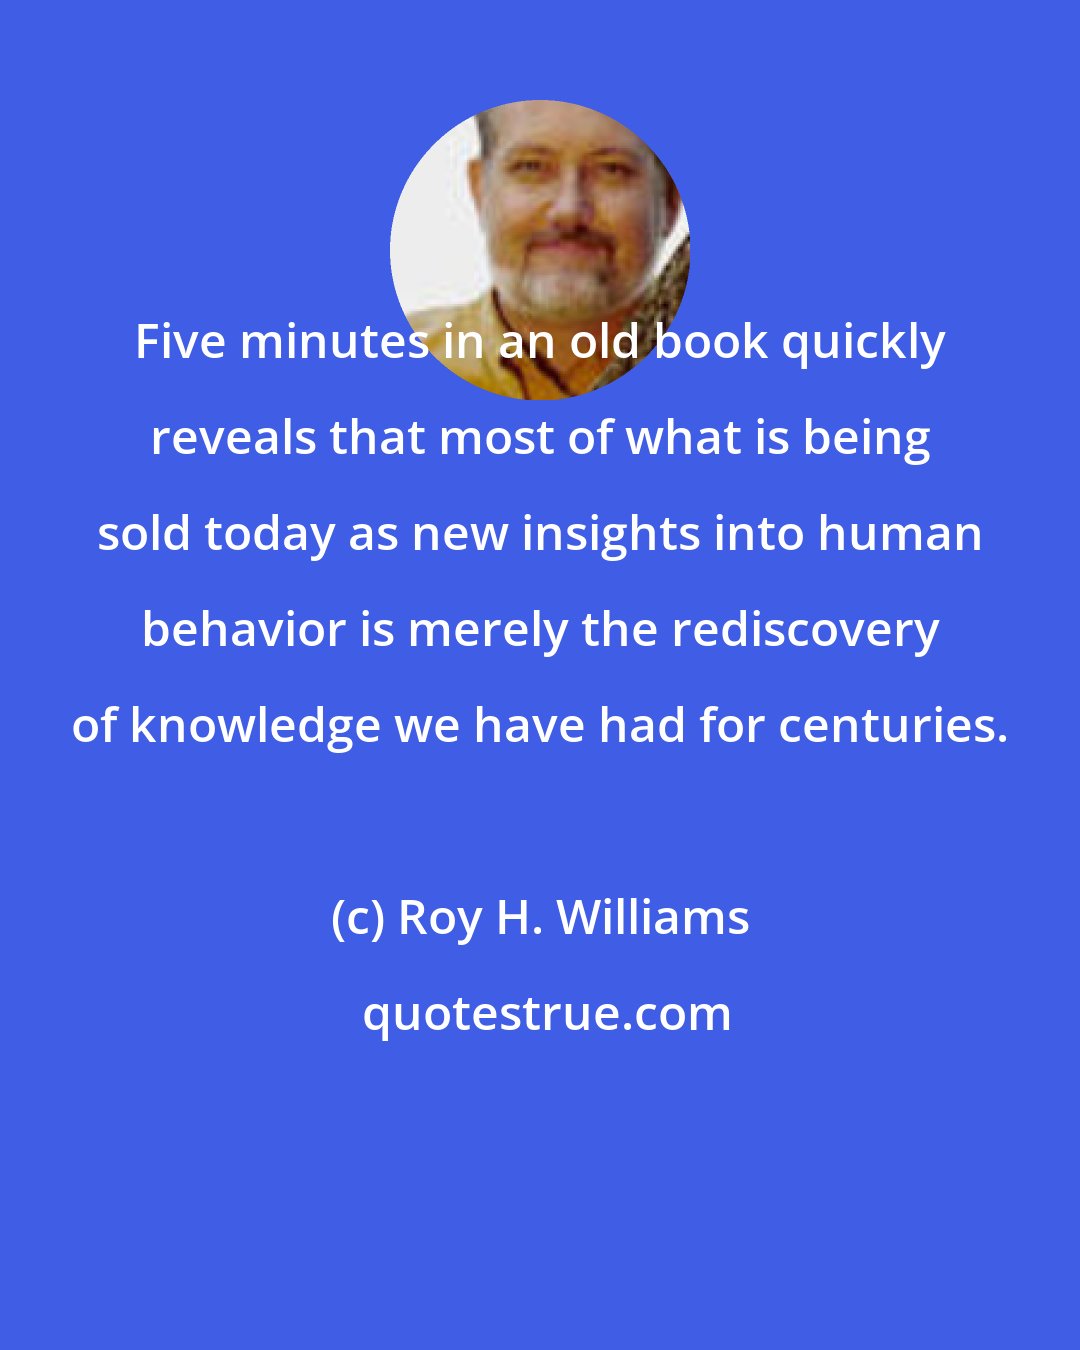 Roy H. Williams: Five minutes in an old book quickly reveals that most of what is being sold today as new insights into human behavior is merely the rediscovery of knowledge we have had for centuries.